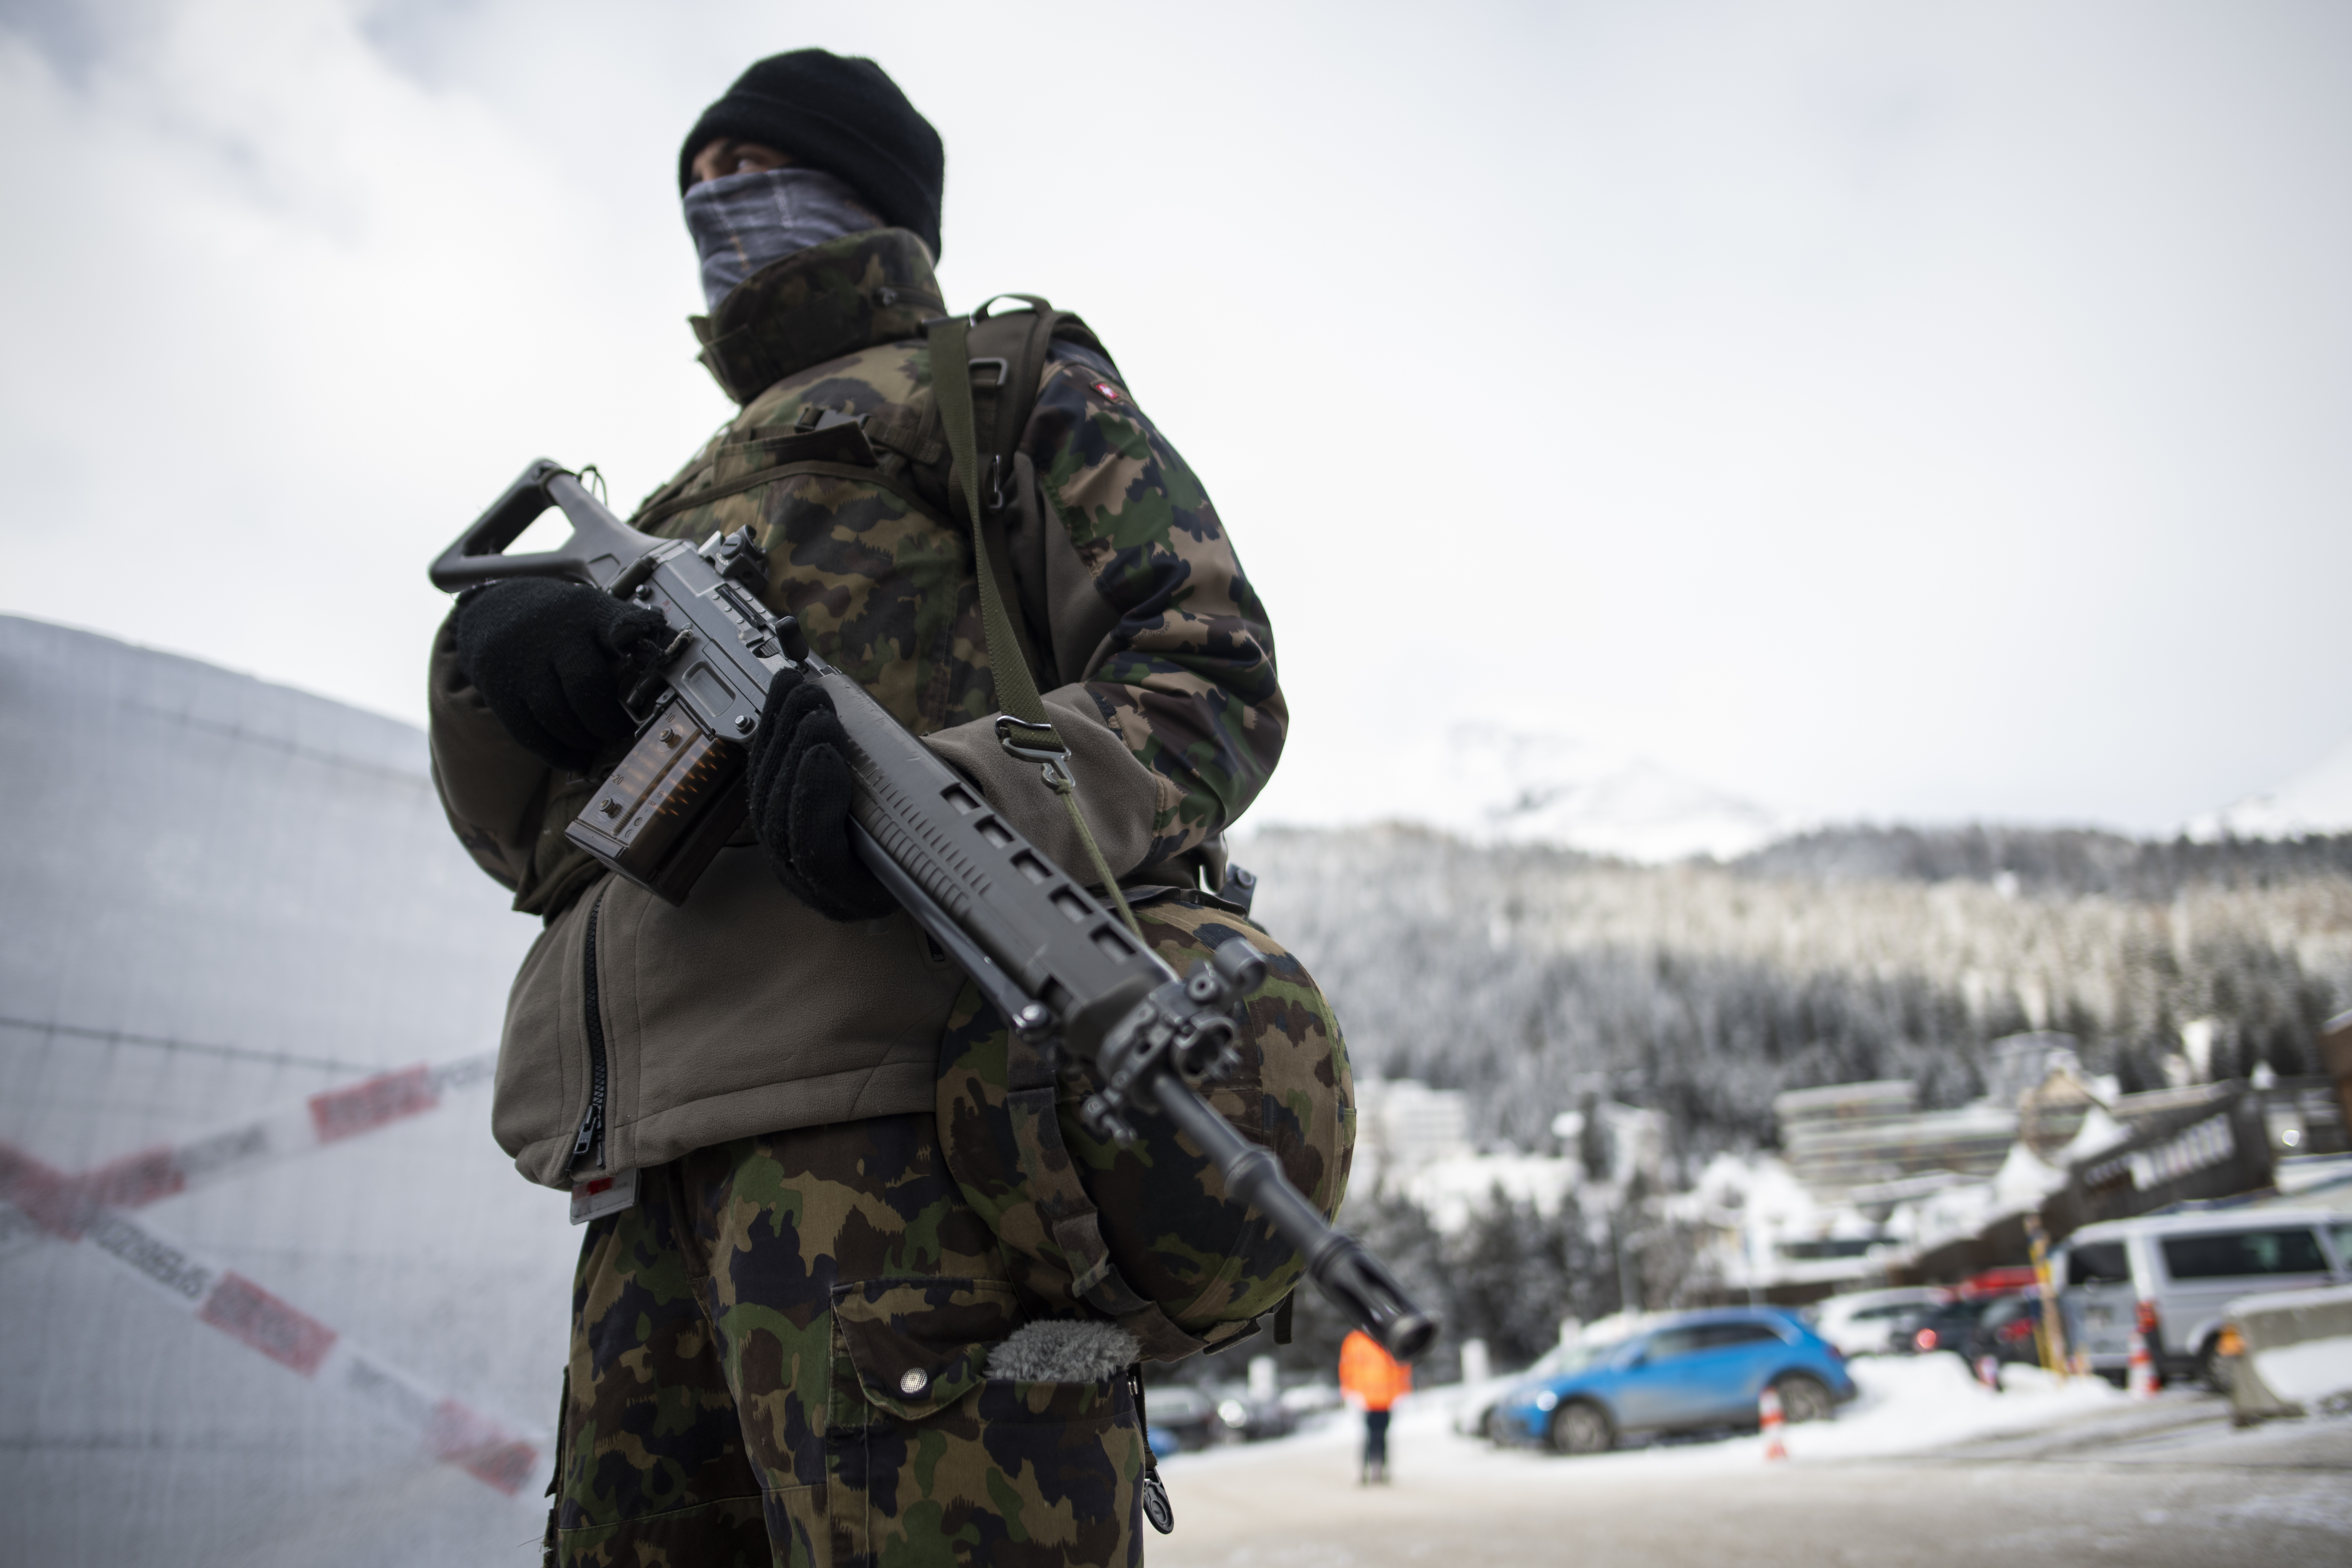 A soldier of the Swiss Army is on guard outside the congress center prior the 50th annual meeting of the World Economic Forum, WEF, in Davos, Switzerland, Sunday, Jan. 19, 2020. (Gian Ehrenzeller/Keystone via AP)